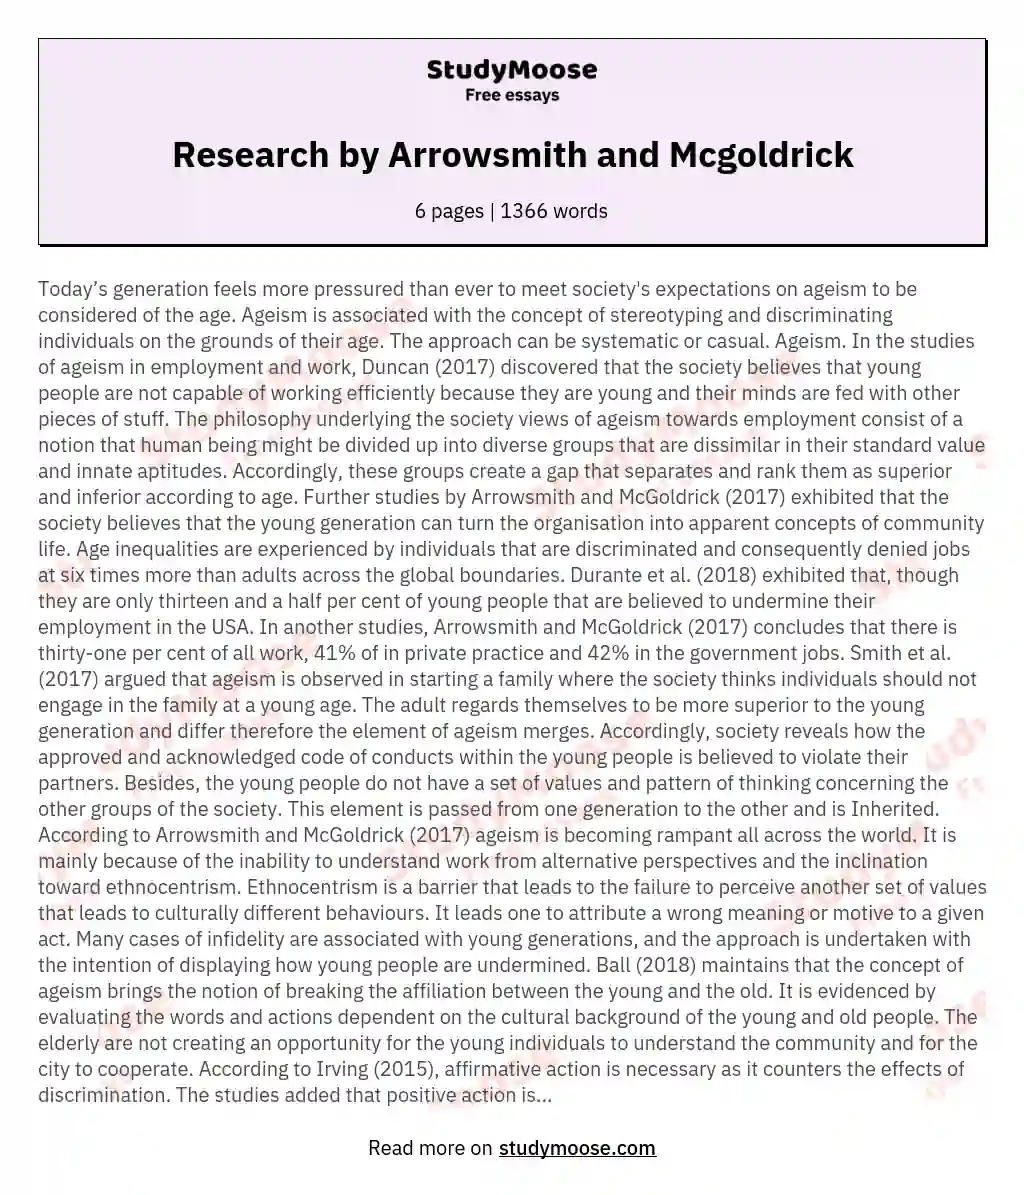 Research by Arrowsmith and Mcgoldrick essay